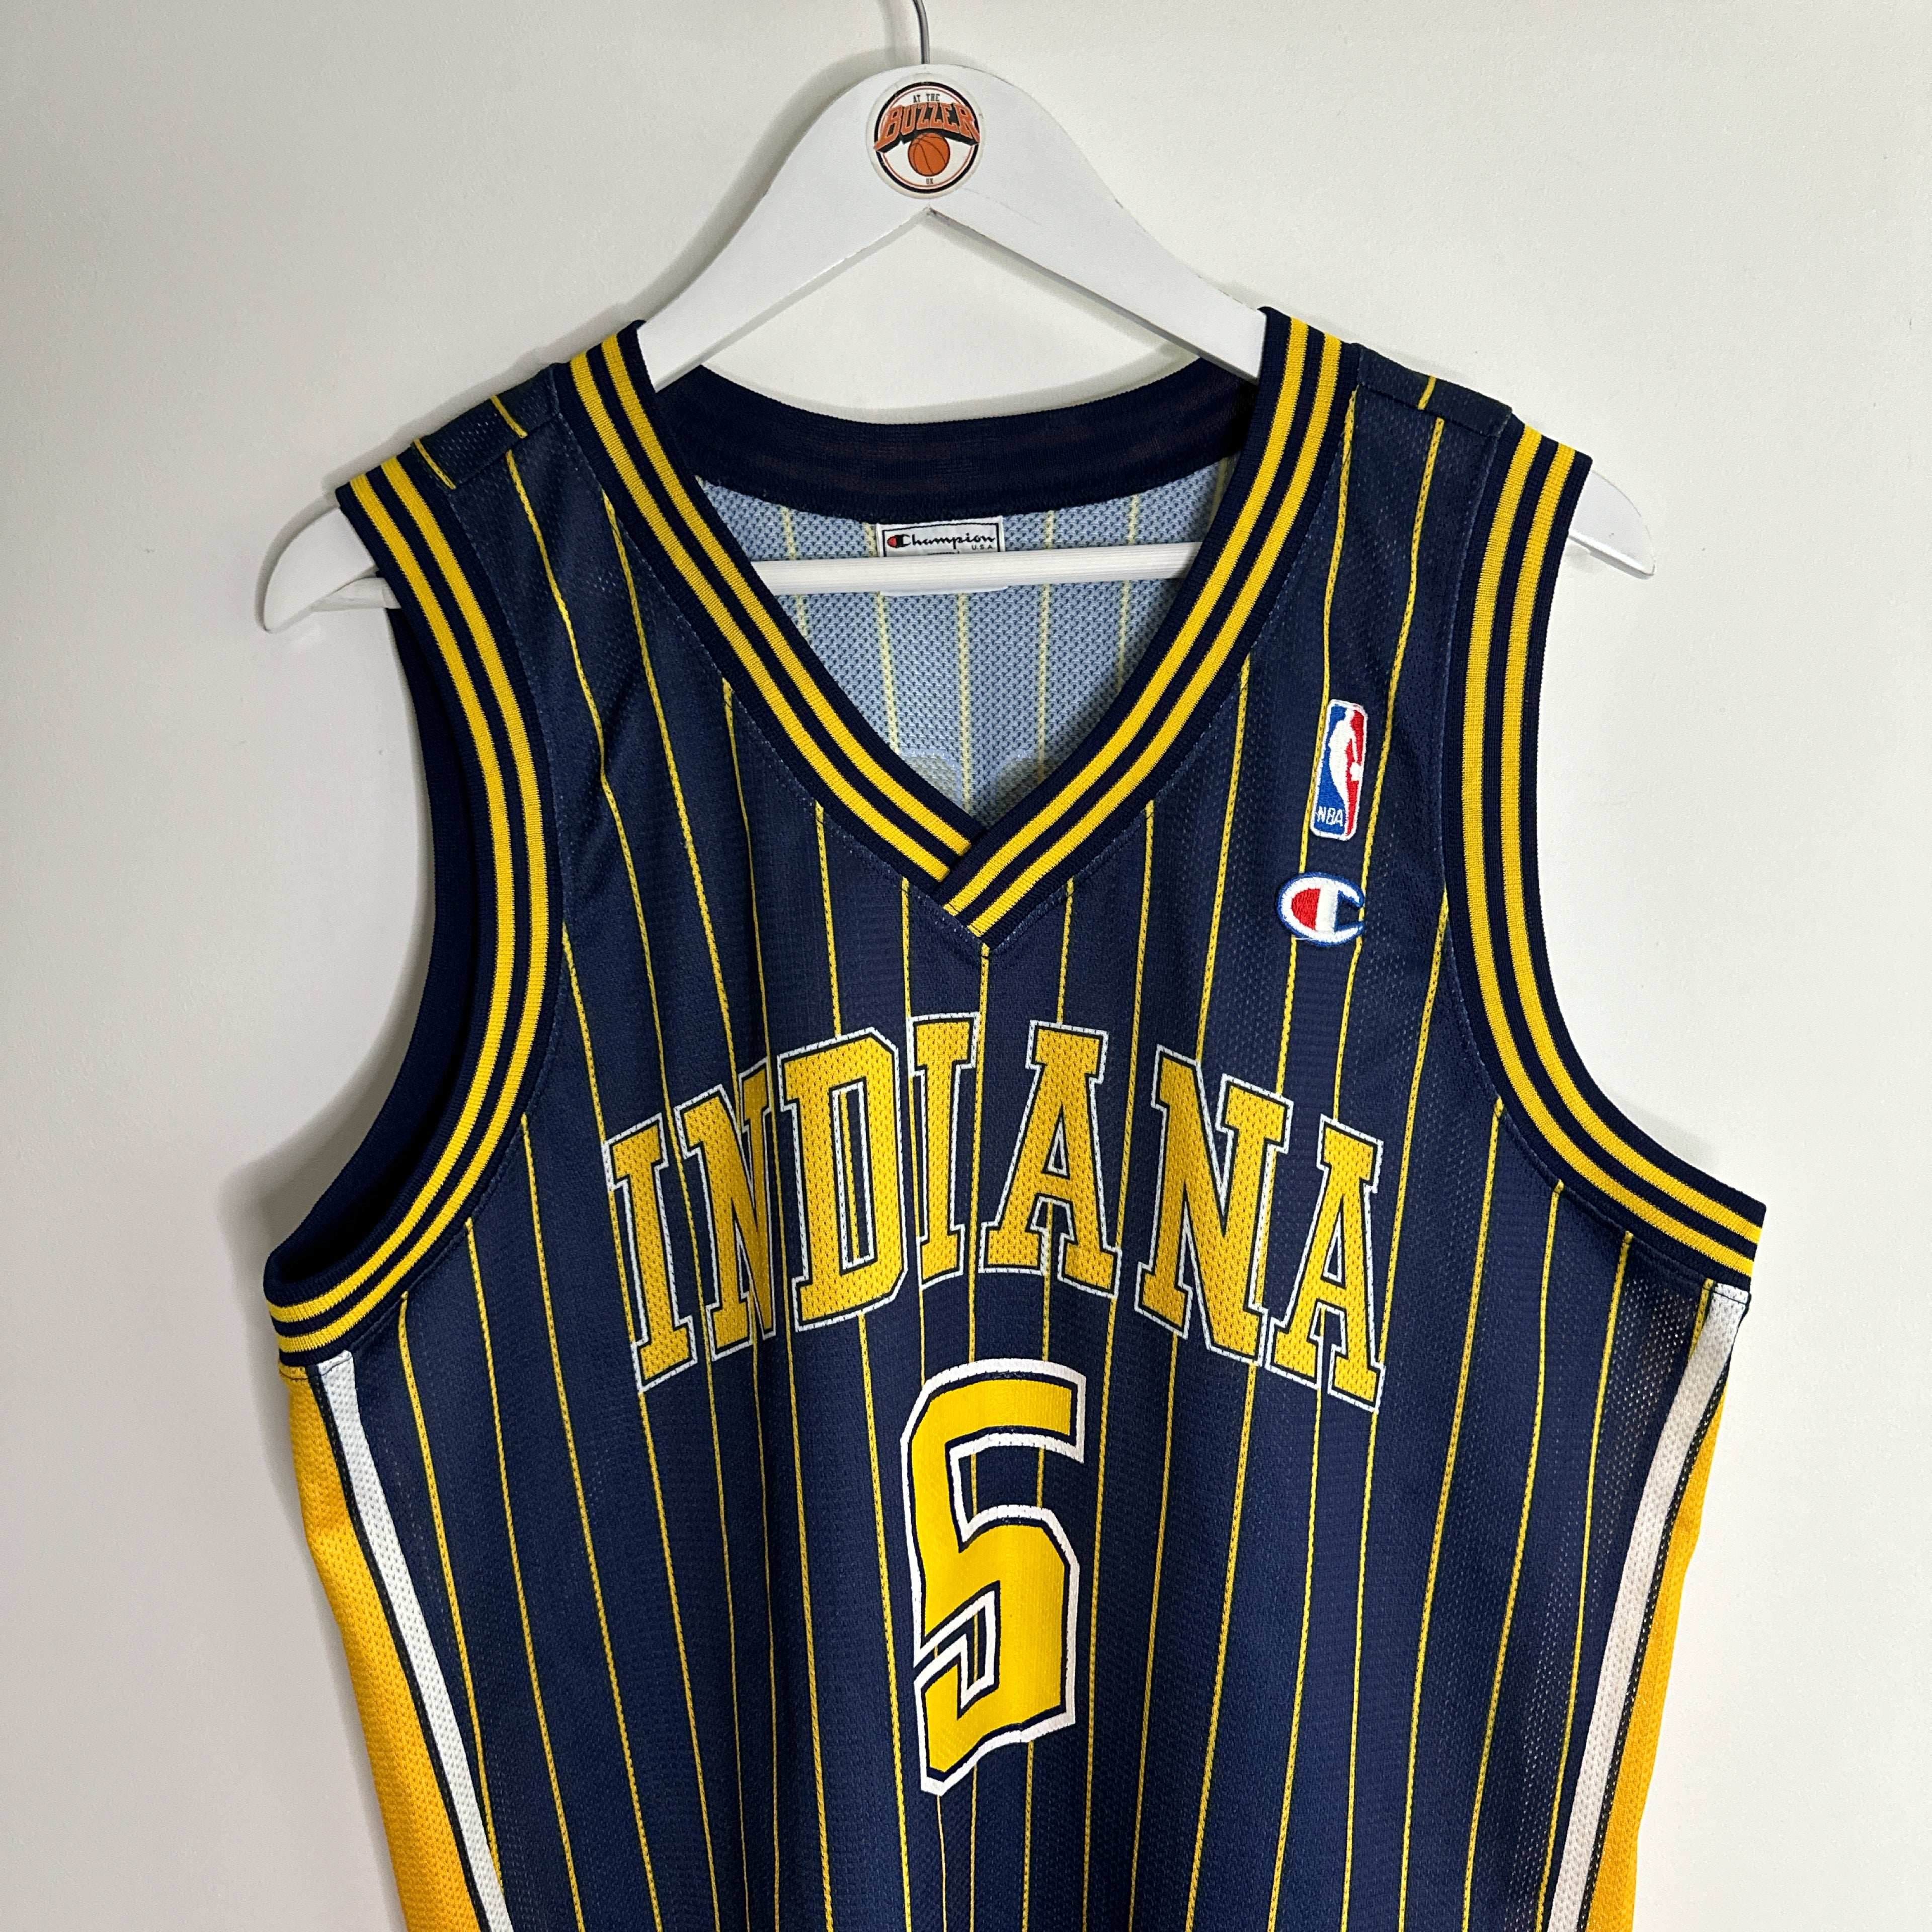 Indiana Pacers Jaylen Rose Champion jersey - Large